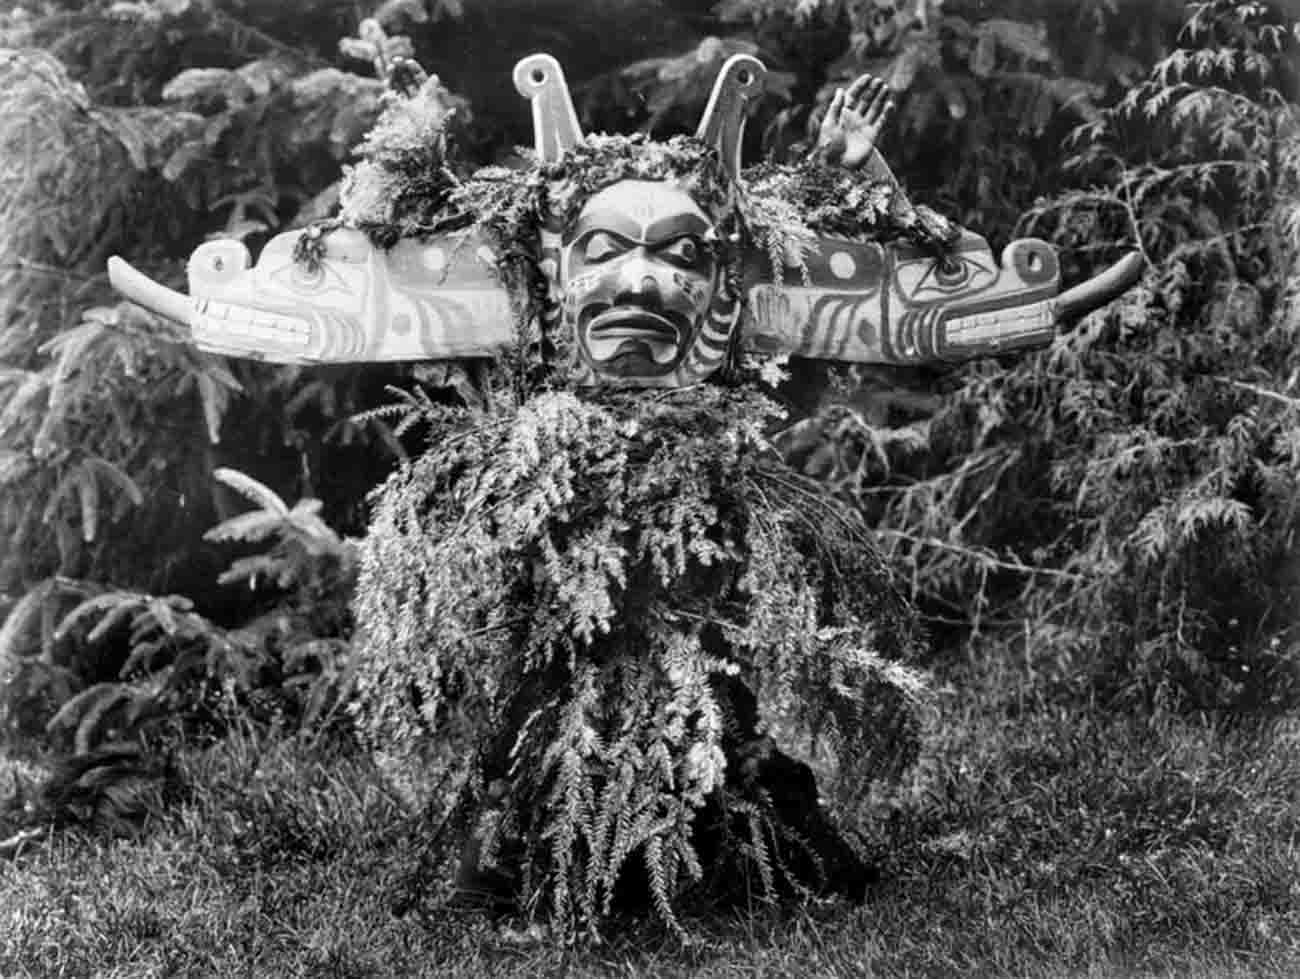 Sisiutl, one of the main dancers in the Winter Dance ceremonies, wearing a double-headed serpent mask and shirt made of hemlock boughs.